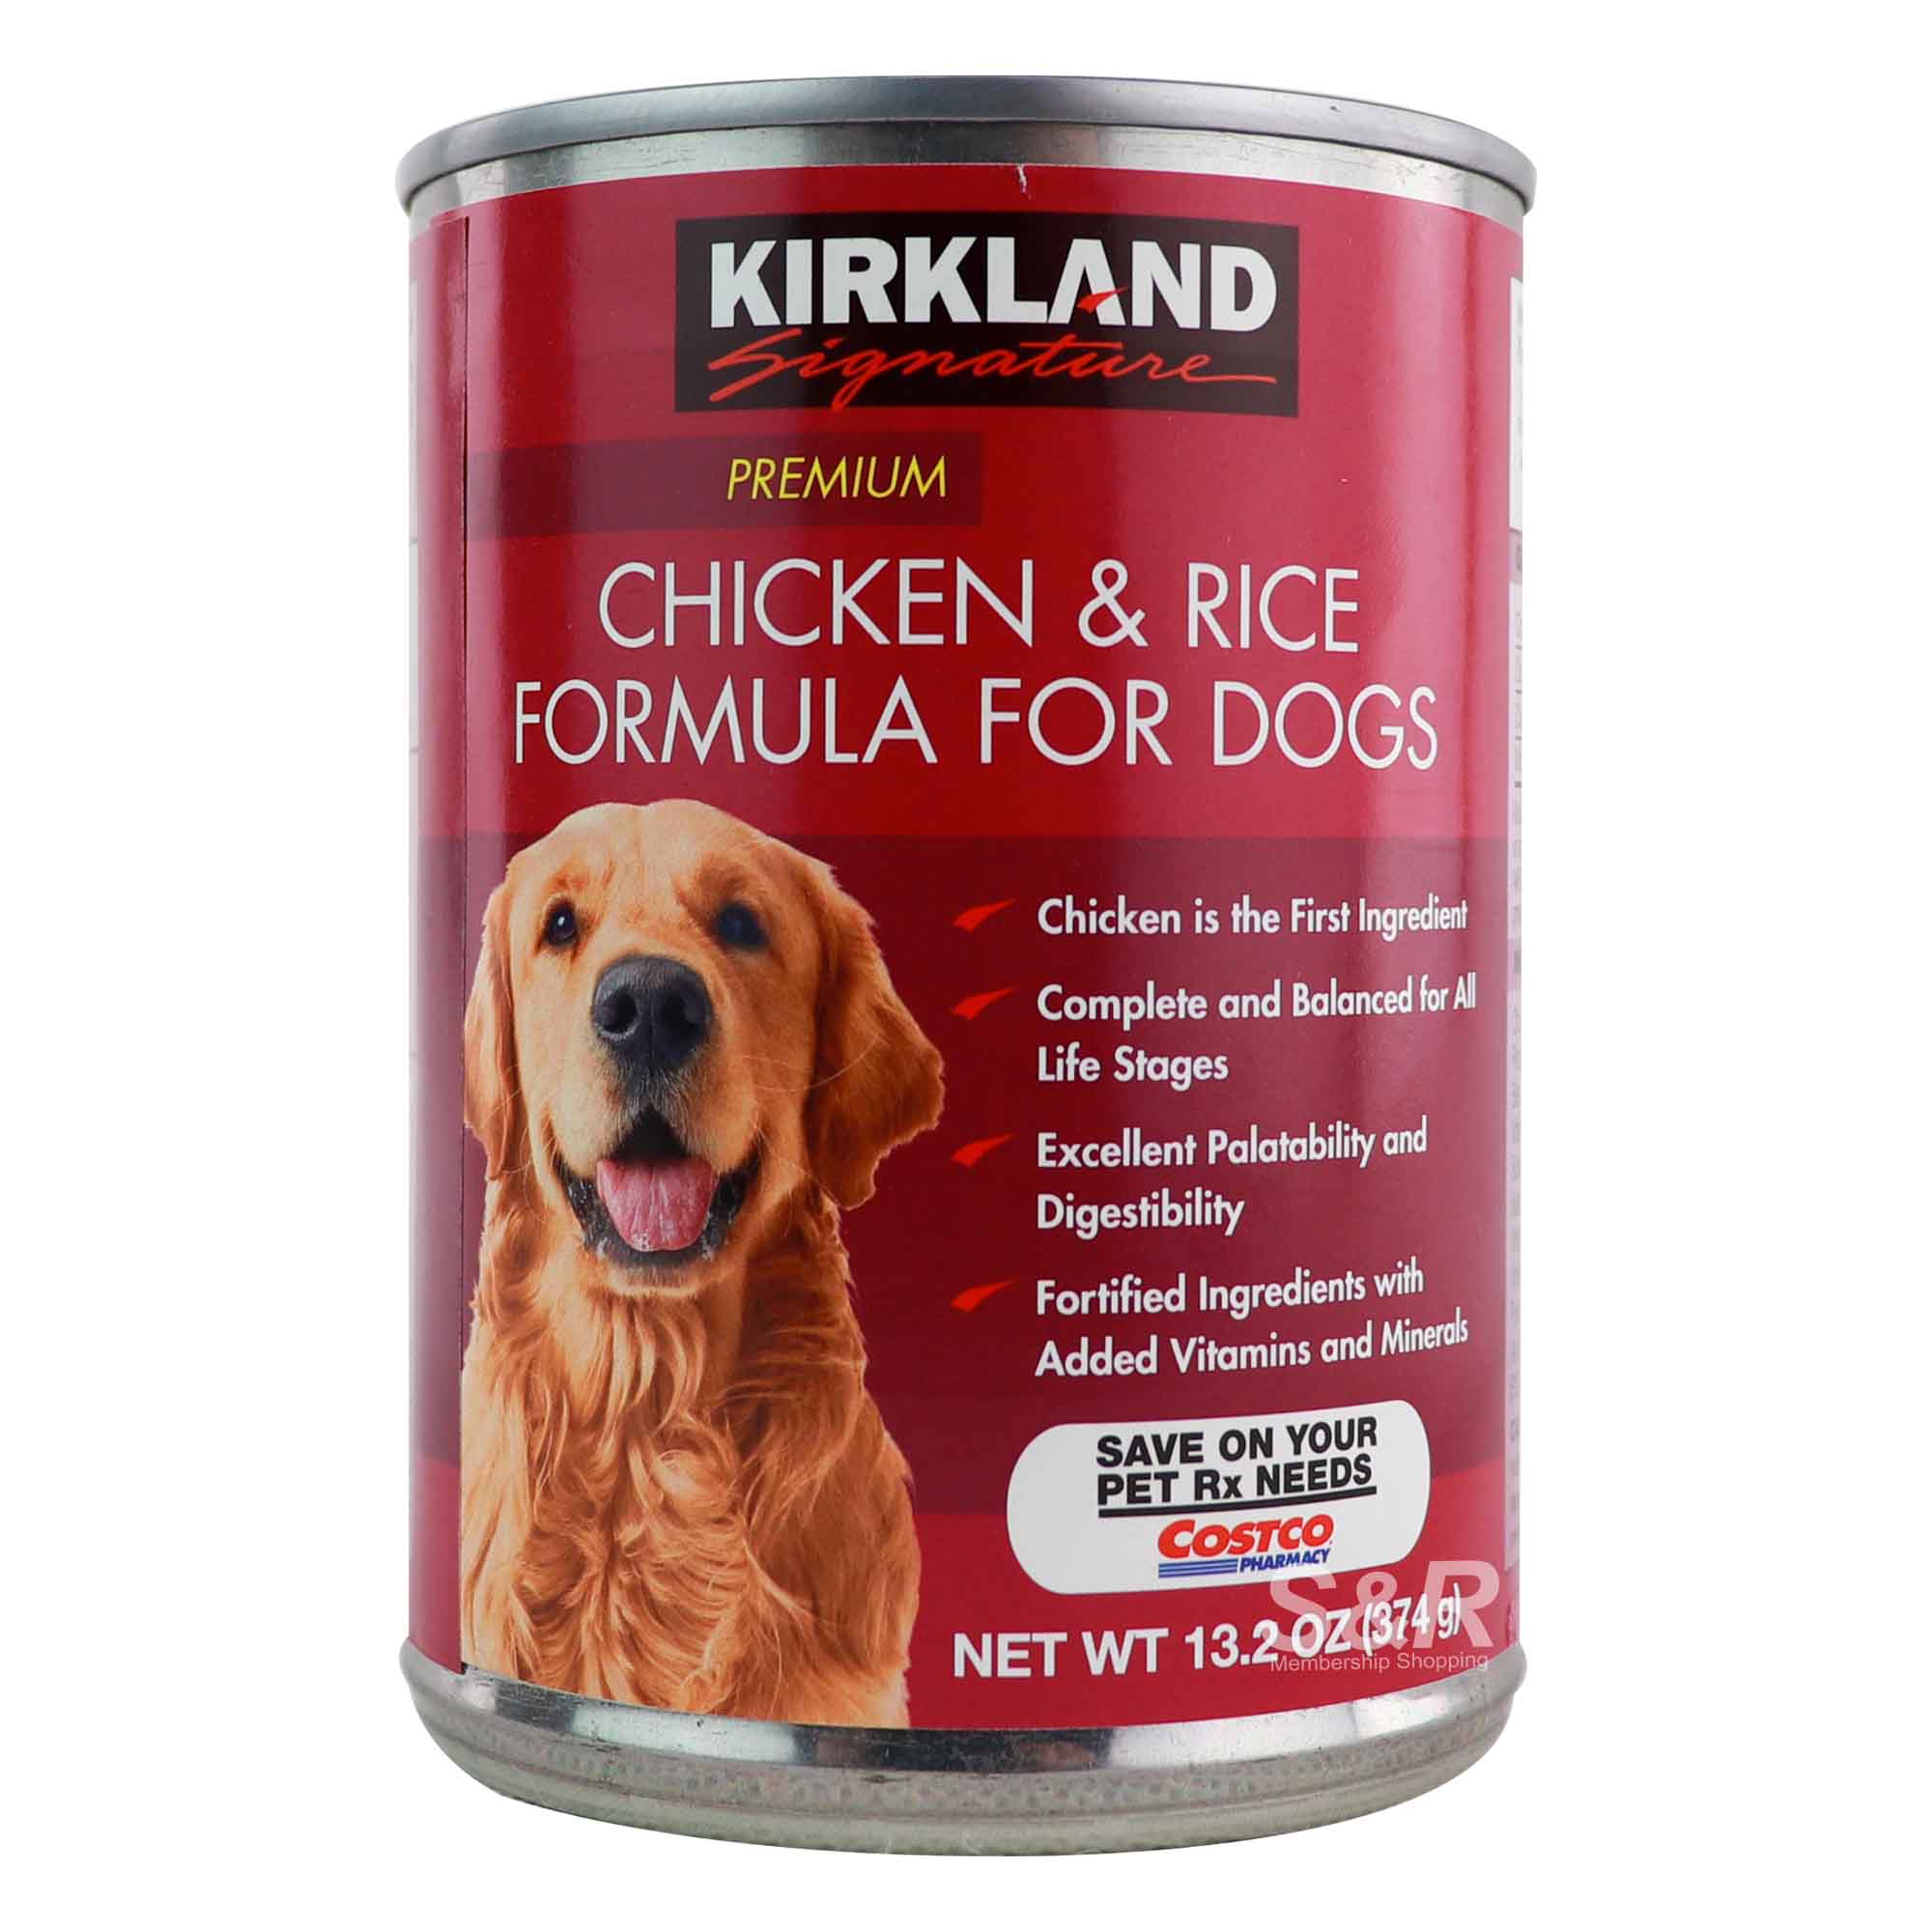 what are the ingredients in kirkland dog food